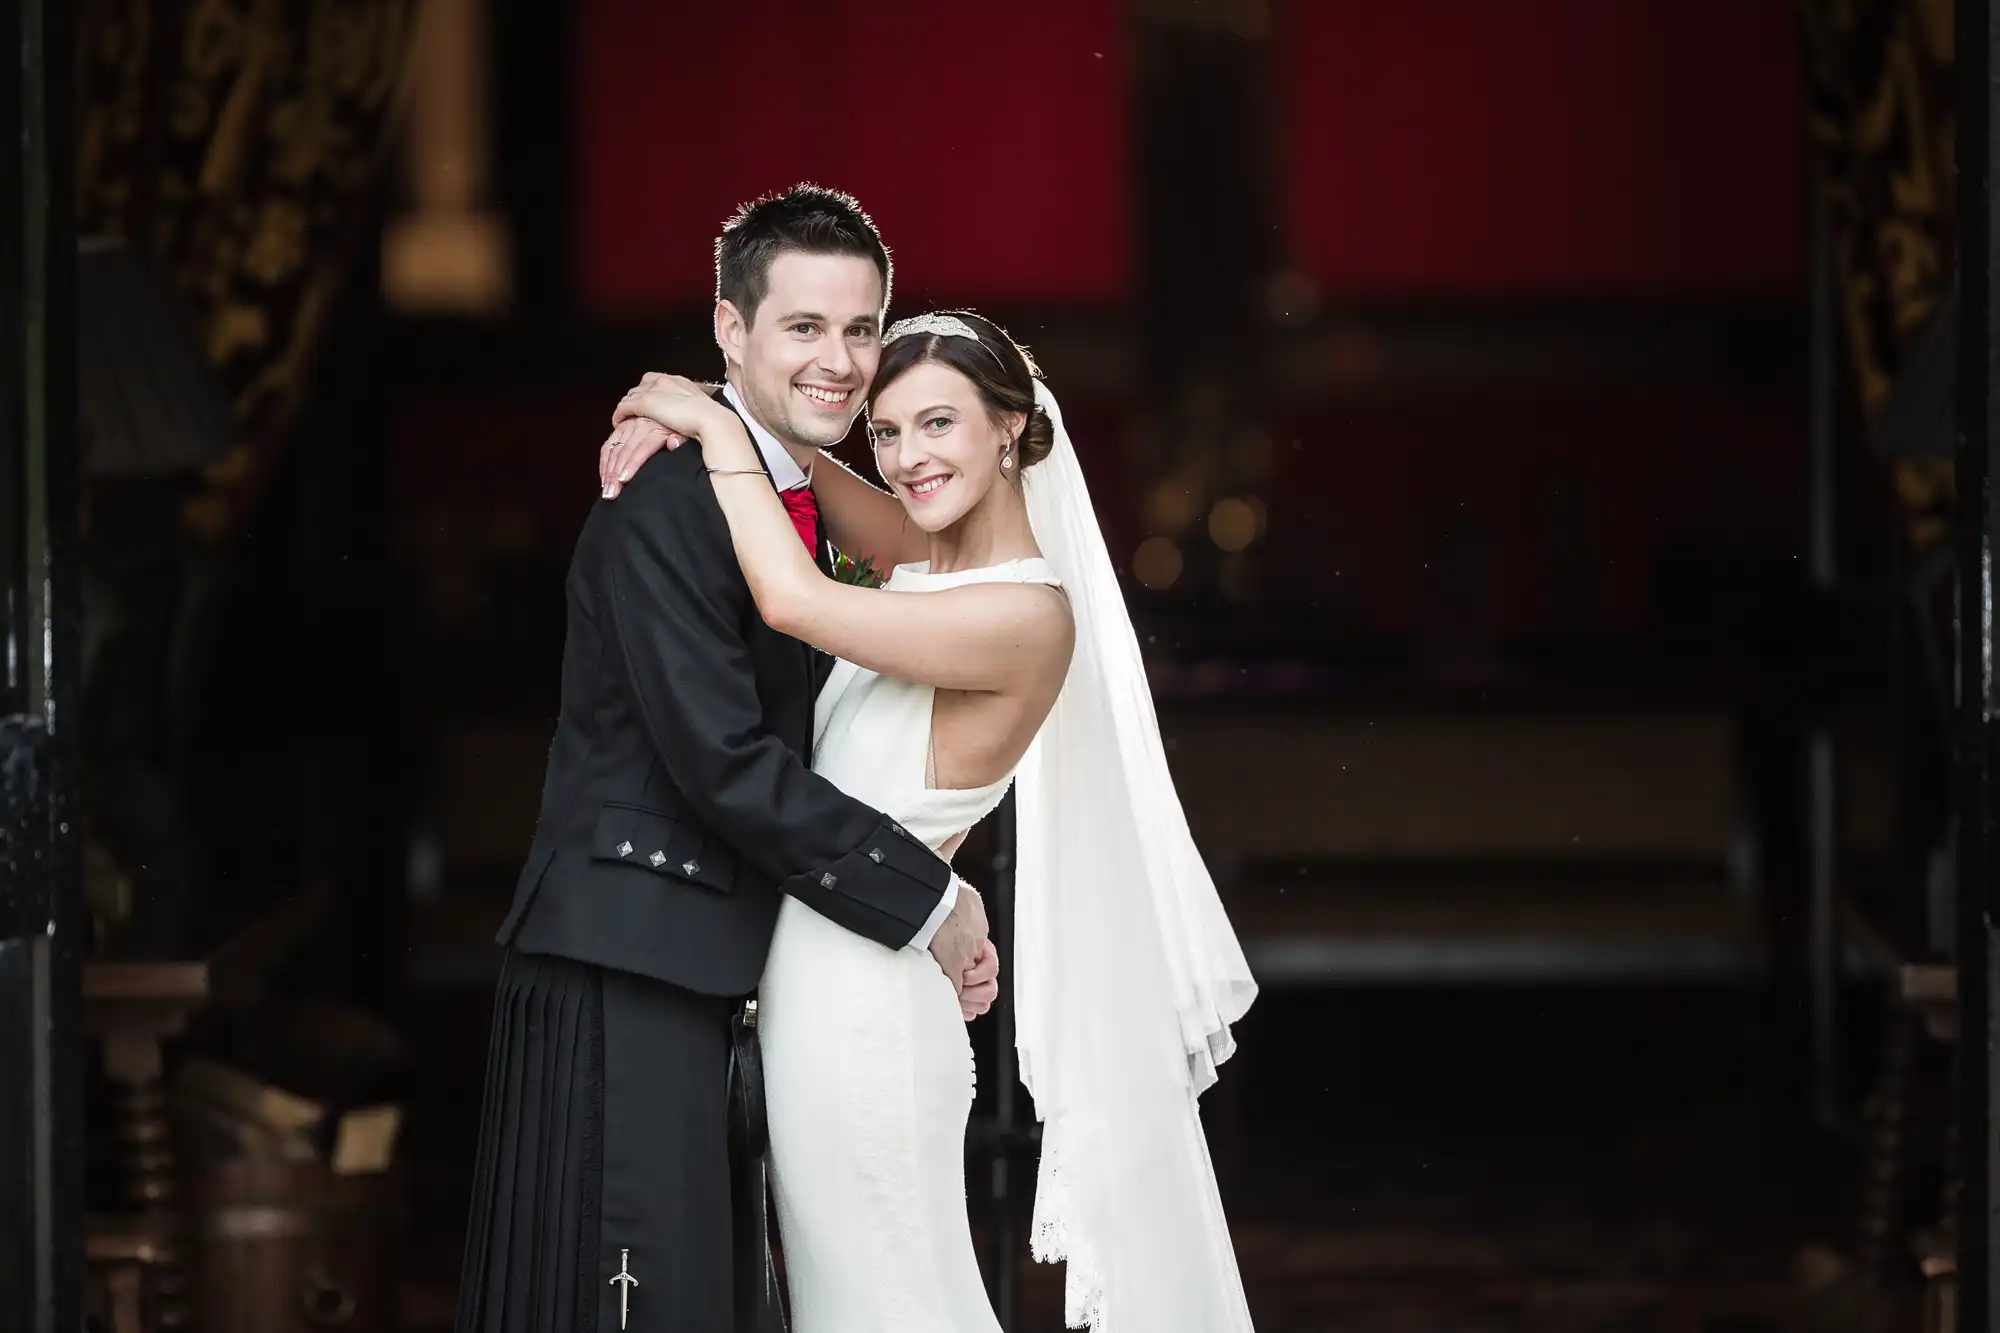 A bride in a white dress and veil stands with her arms around a groom in a black suit with a kilt. They are smiling and posing together indoors.